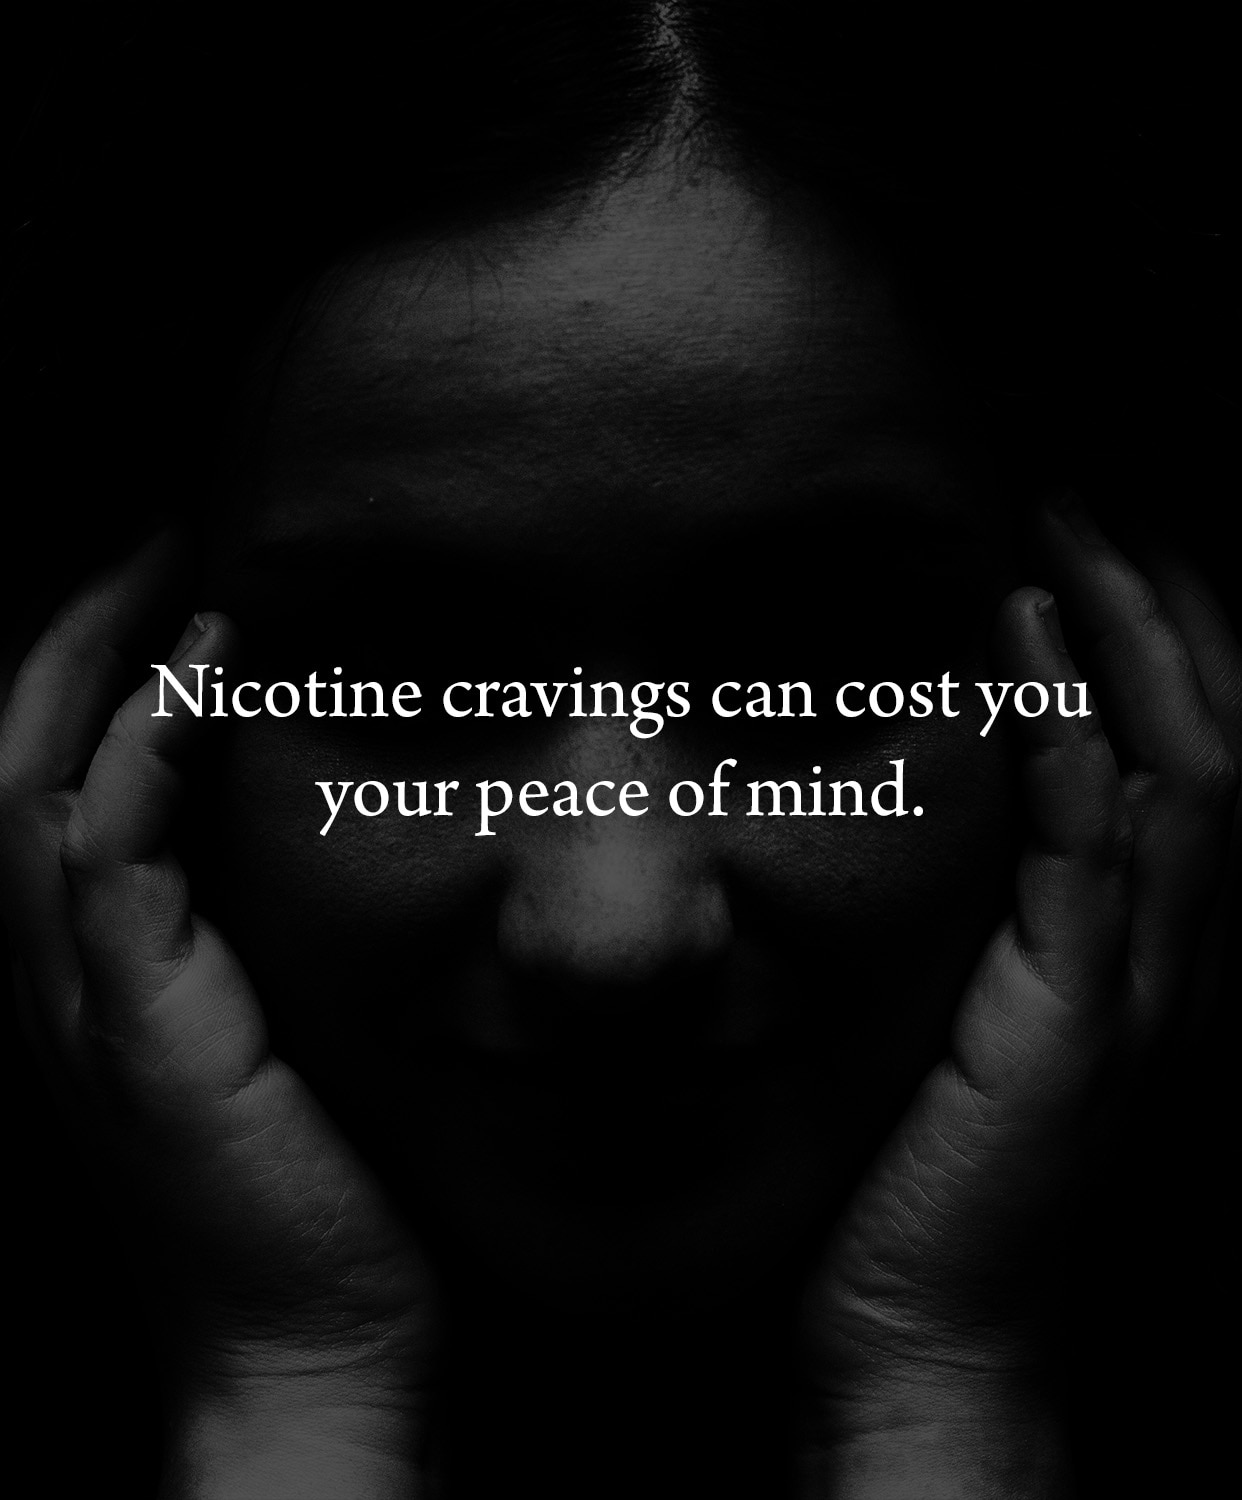 Nicotine cravings can cost you your peace of mind.